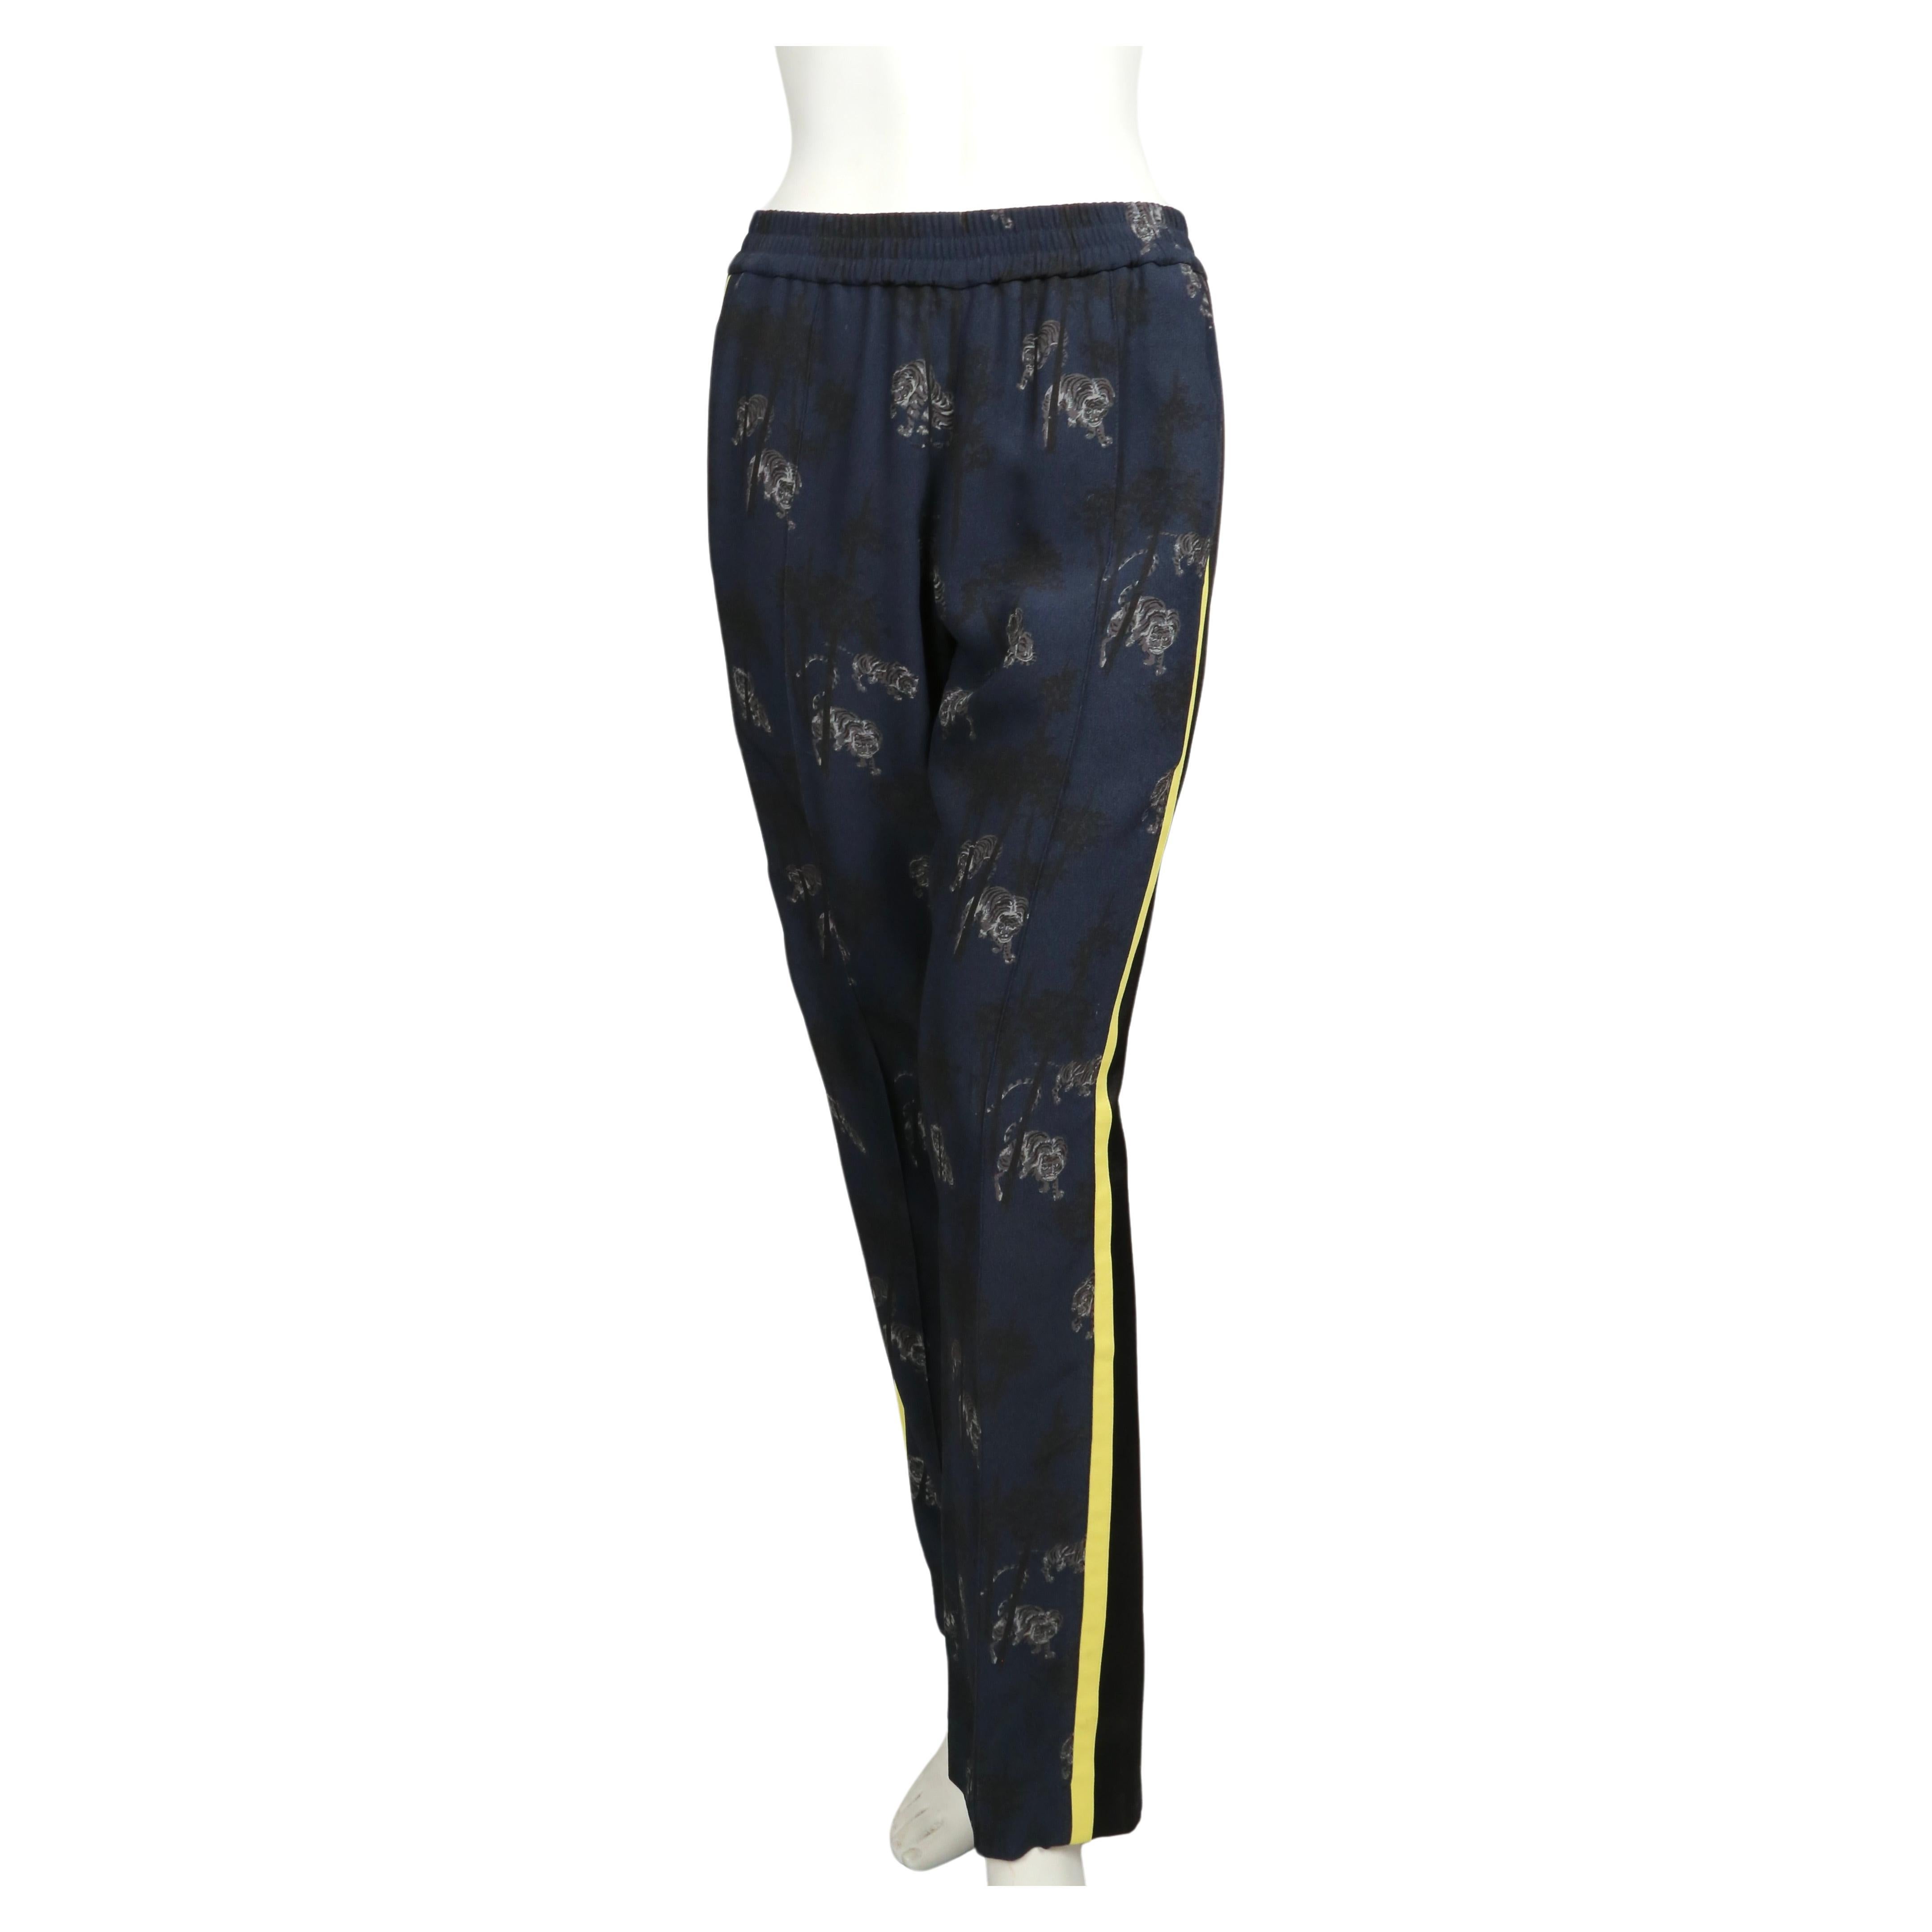 Tiger printed track pants with striped side by Kenzo. French size 36. Pants were not clipped on French size 36 mannequin. Approximate measurements: 26